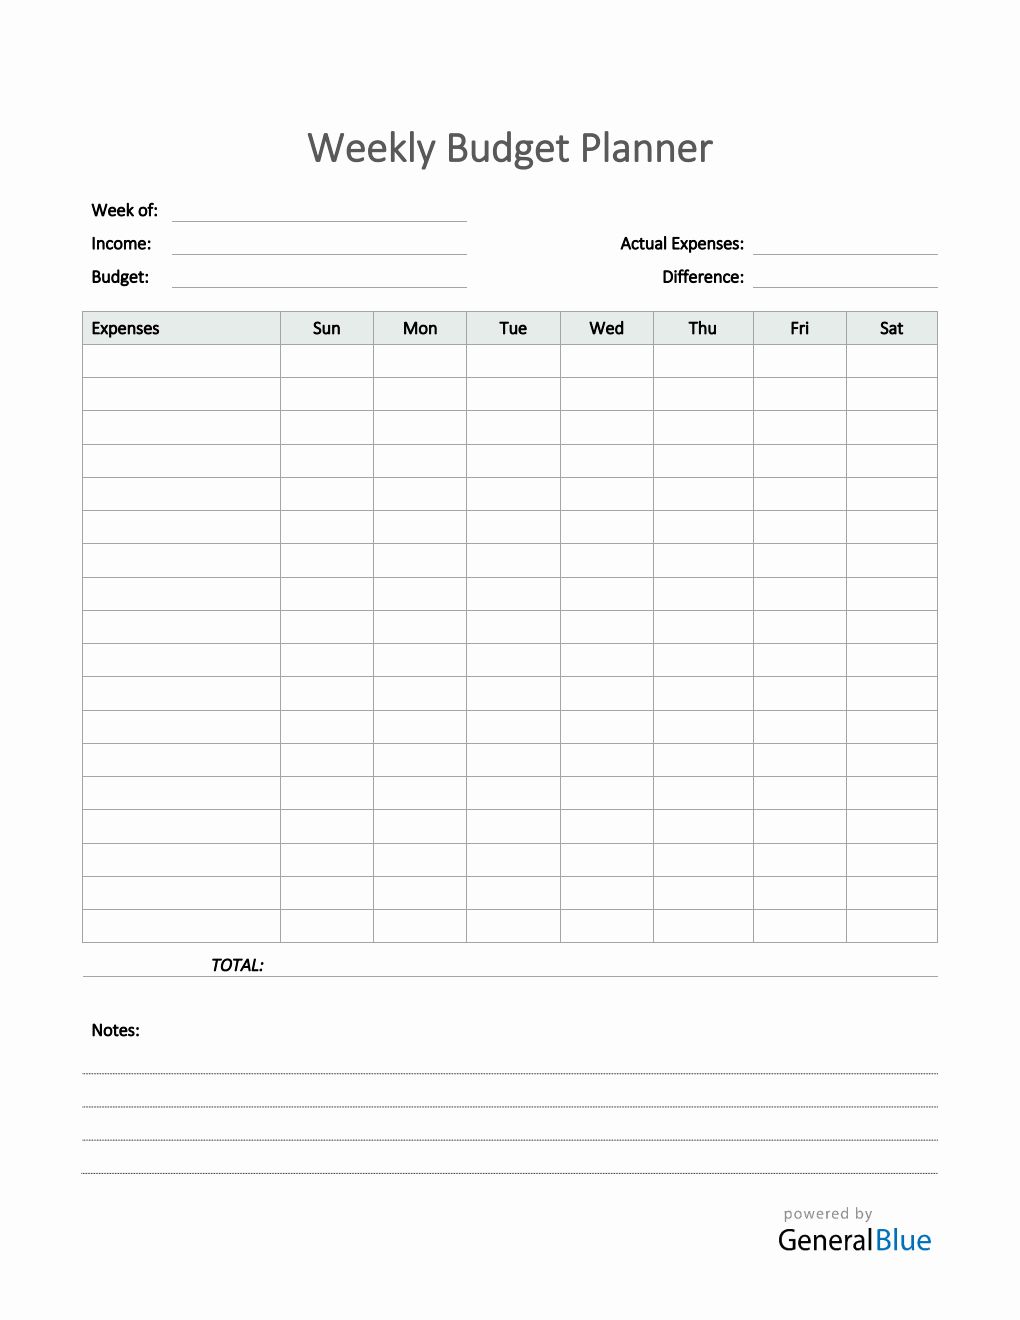 Free Weekly Budget Planner Template